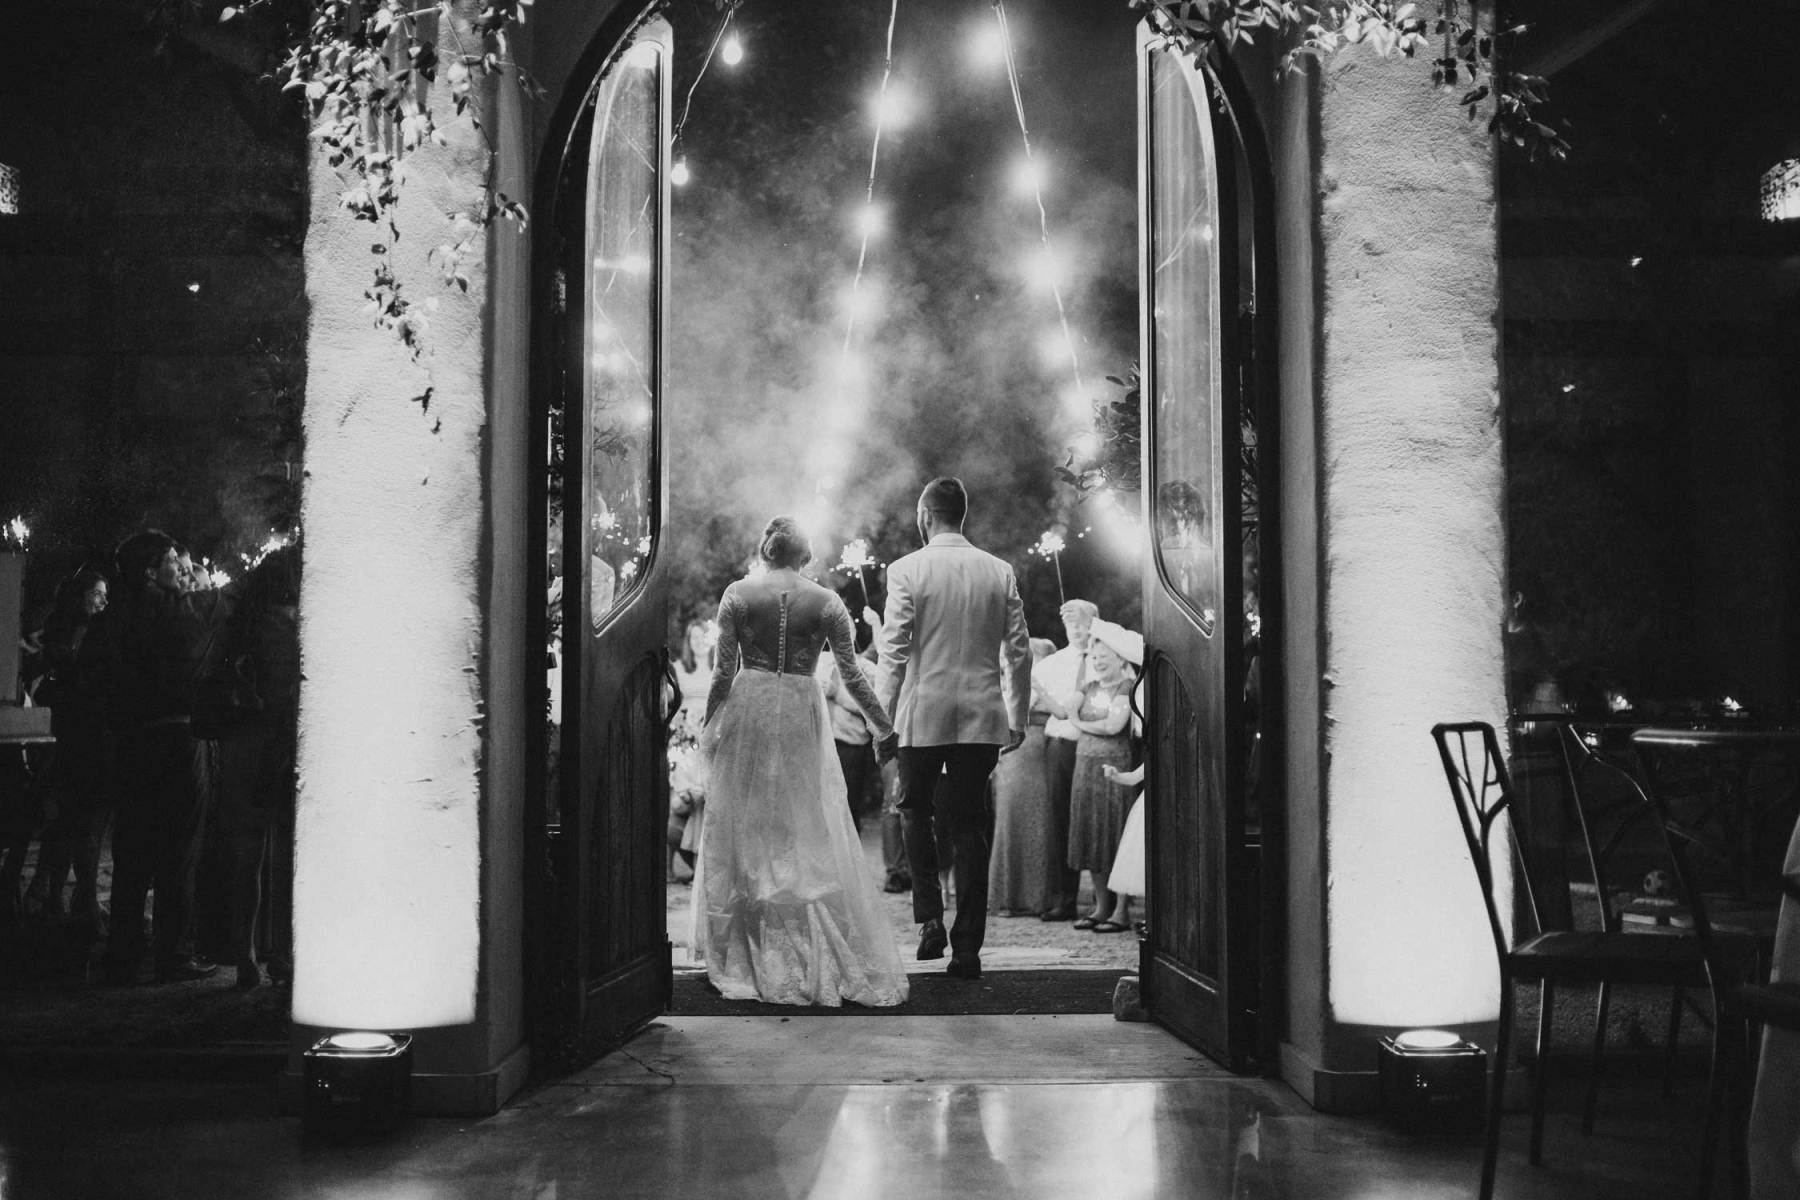 Couple-exit-wedding-reception-with-sparklers-at-Barr-Mansion-in-Austin-Texas-photographed-with-a-Leica-M10-and-35mm-summilux-by-Philip-Thomas